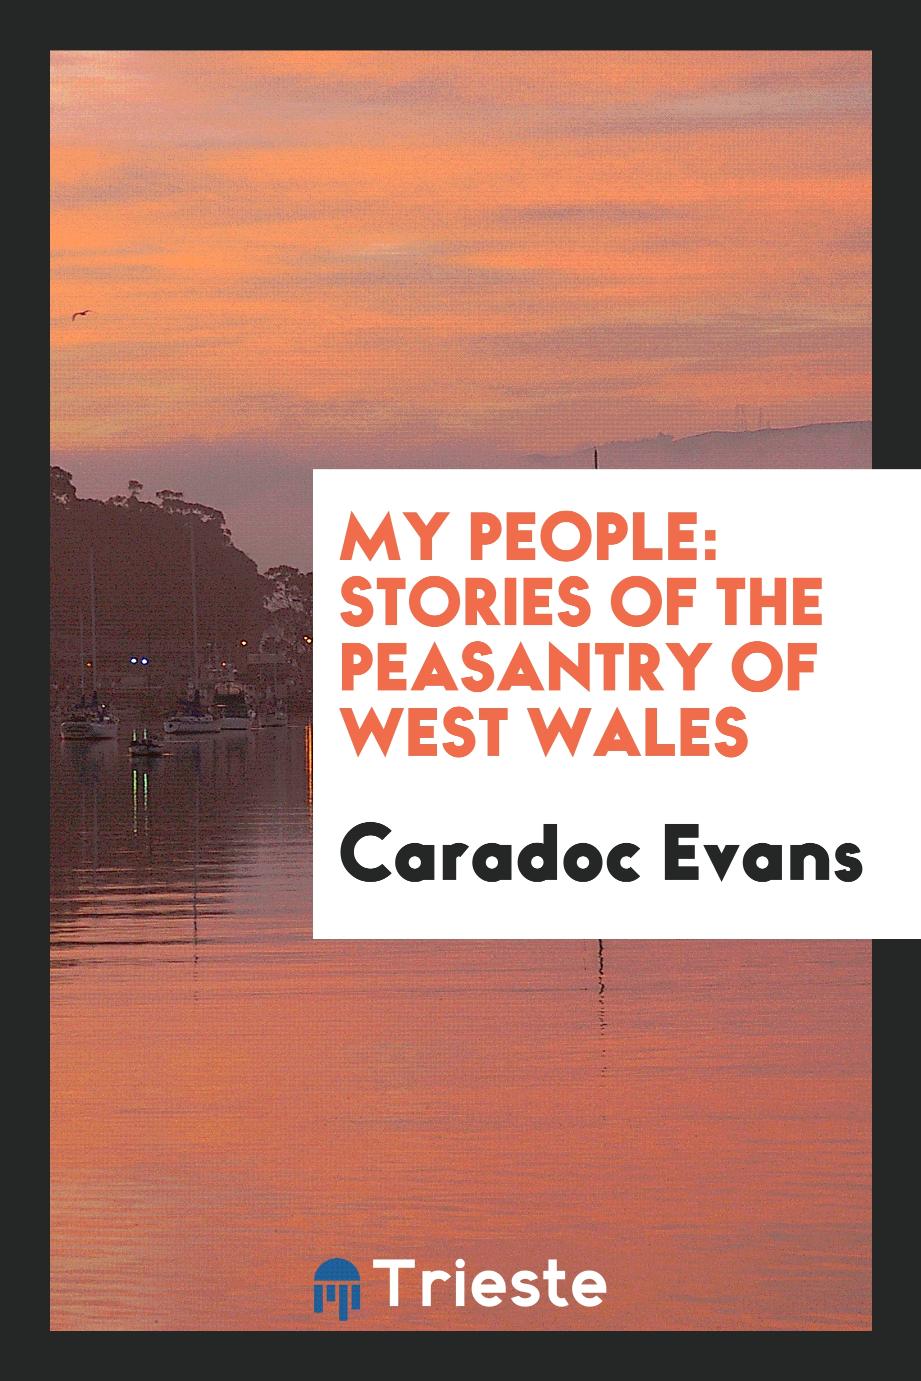 My people: stories of the peasantry of West Wales